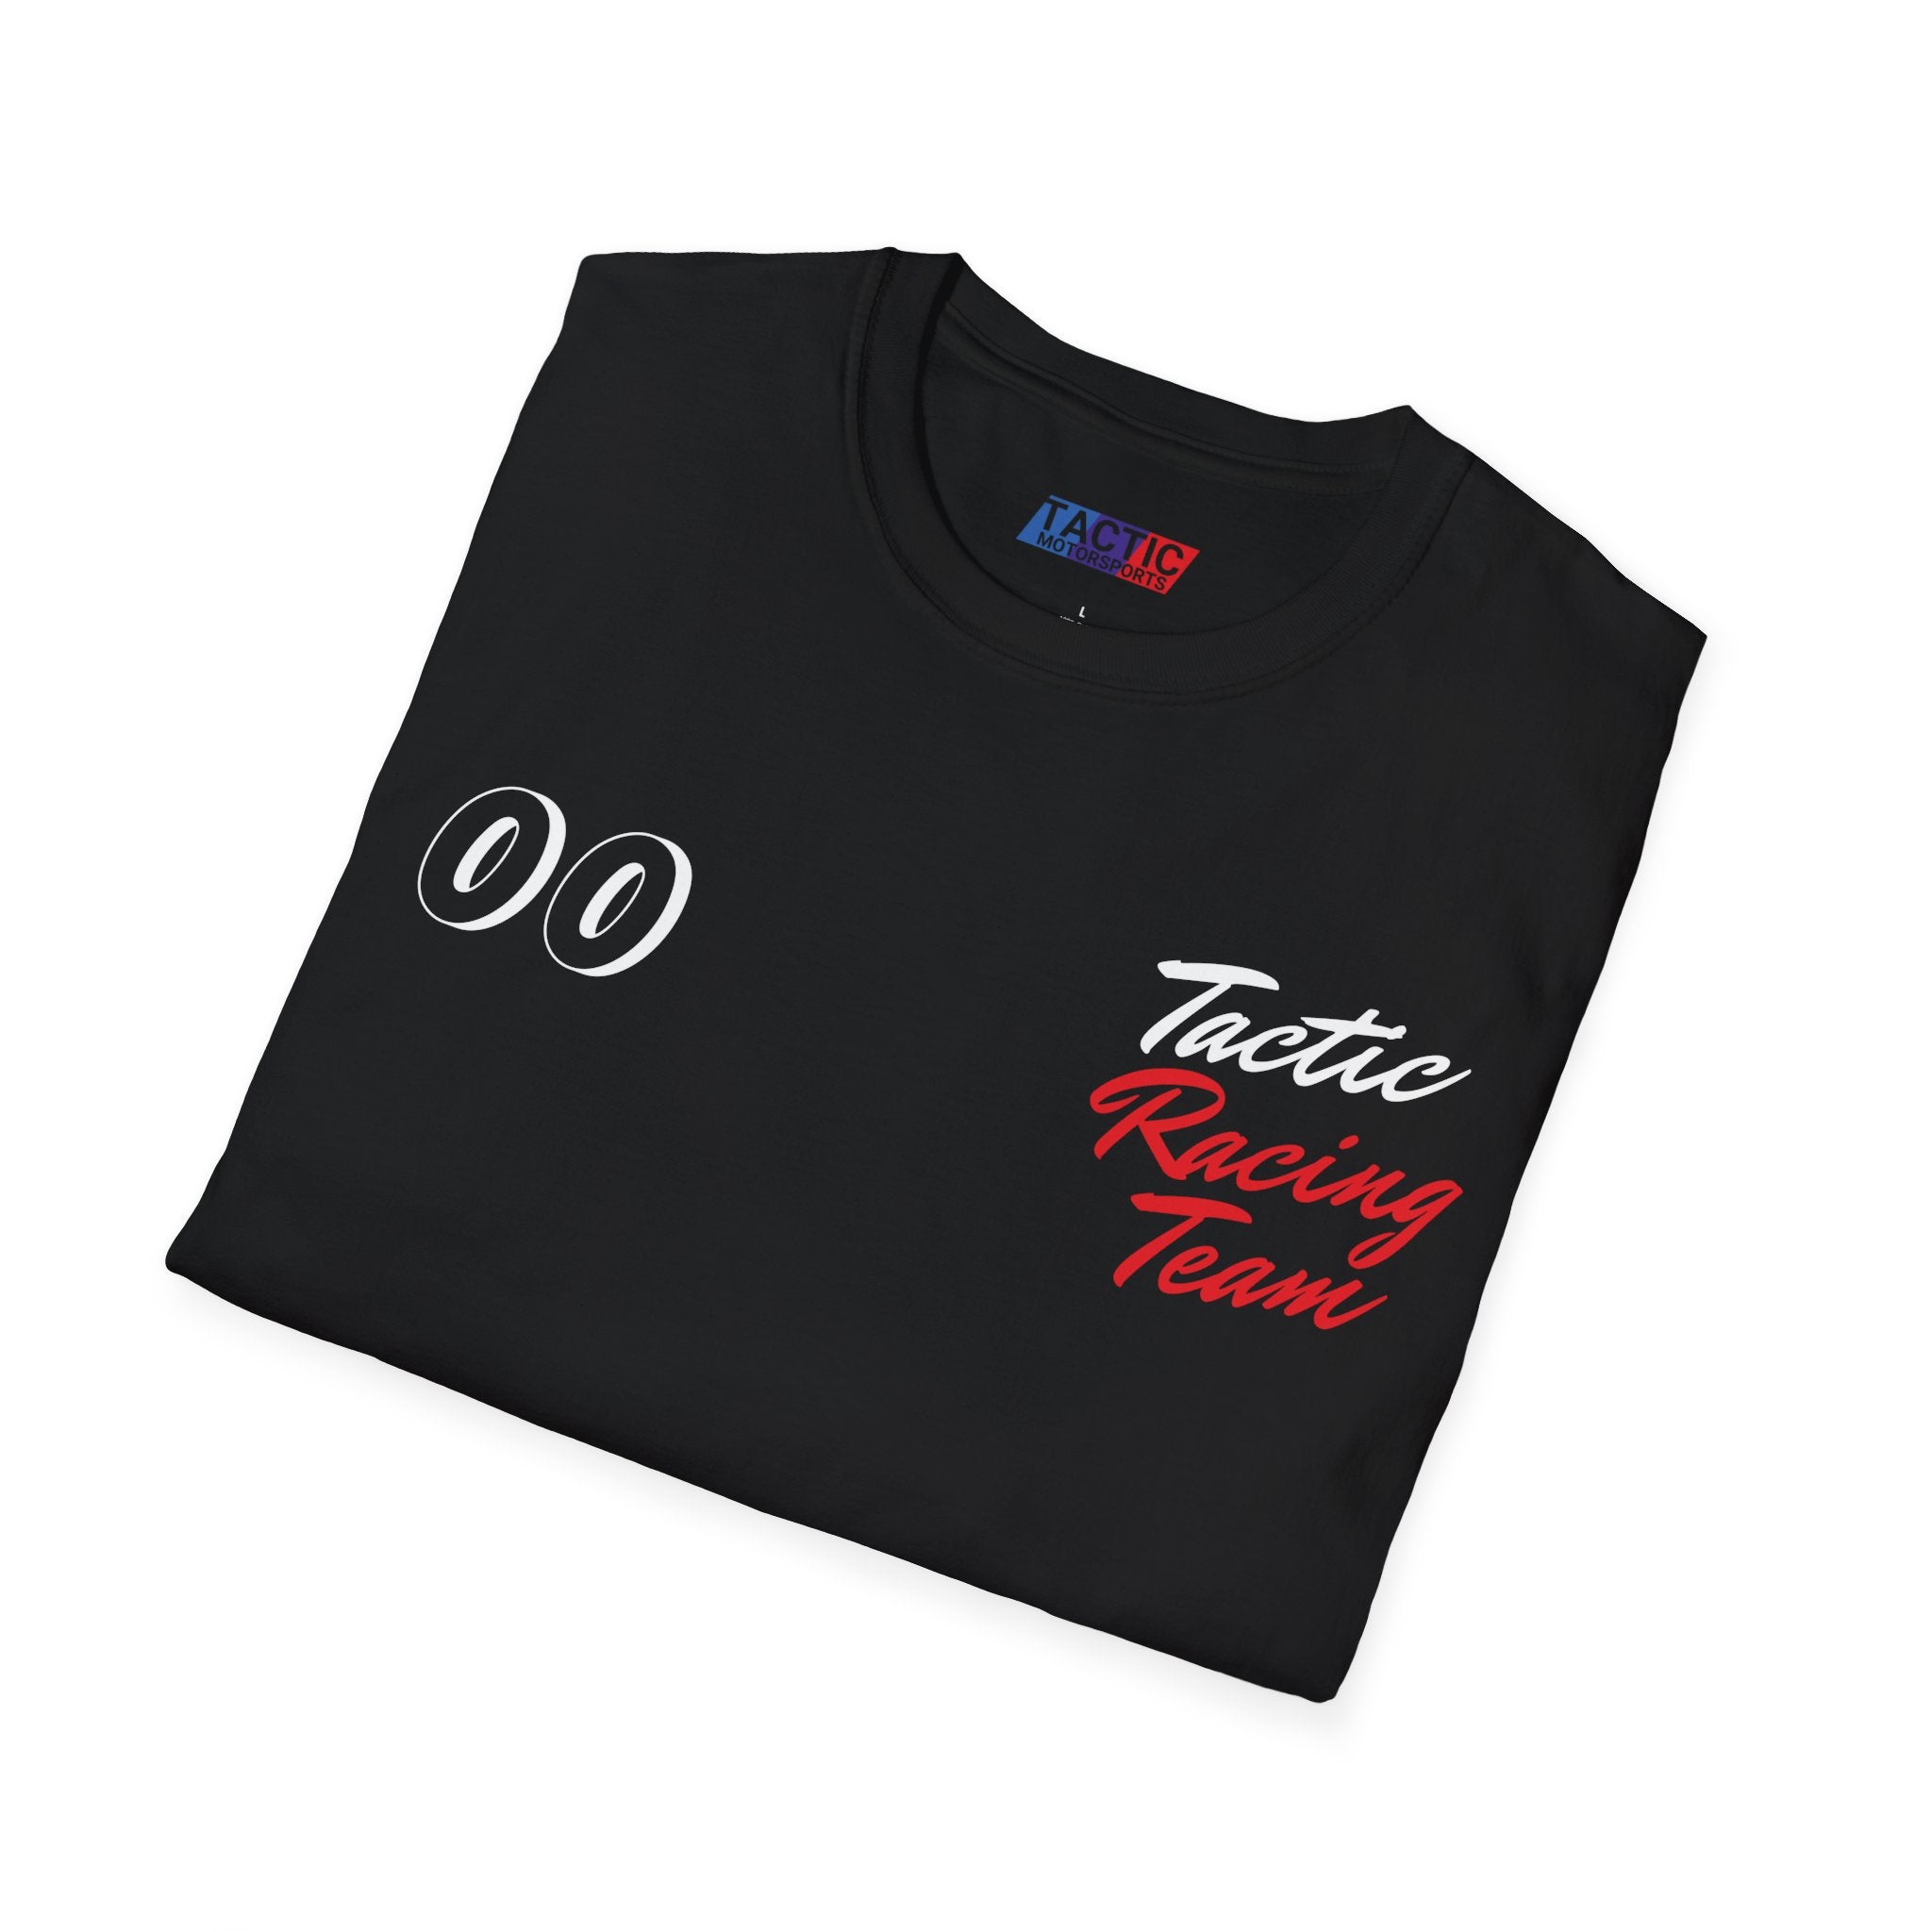 Tactic Motorsports Racing Team Softstyle T-Shirt